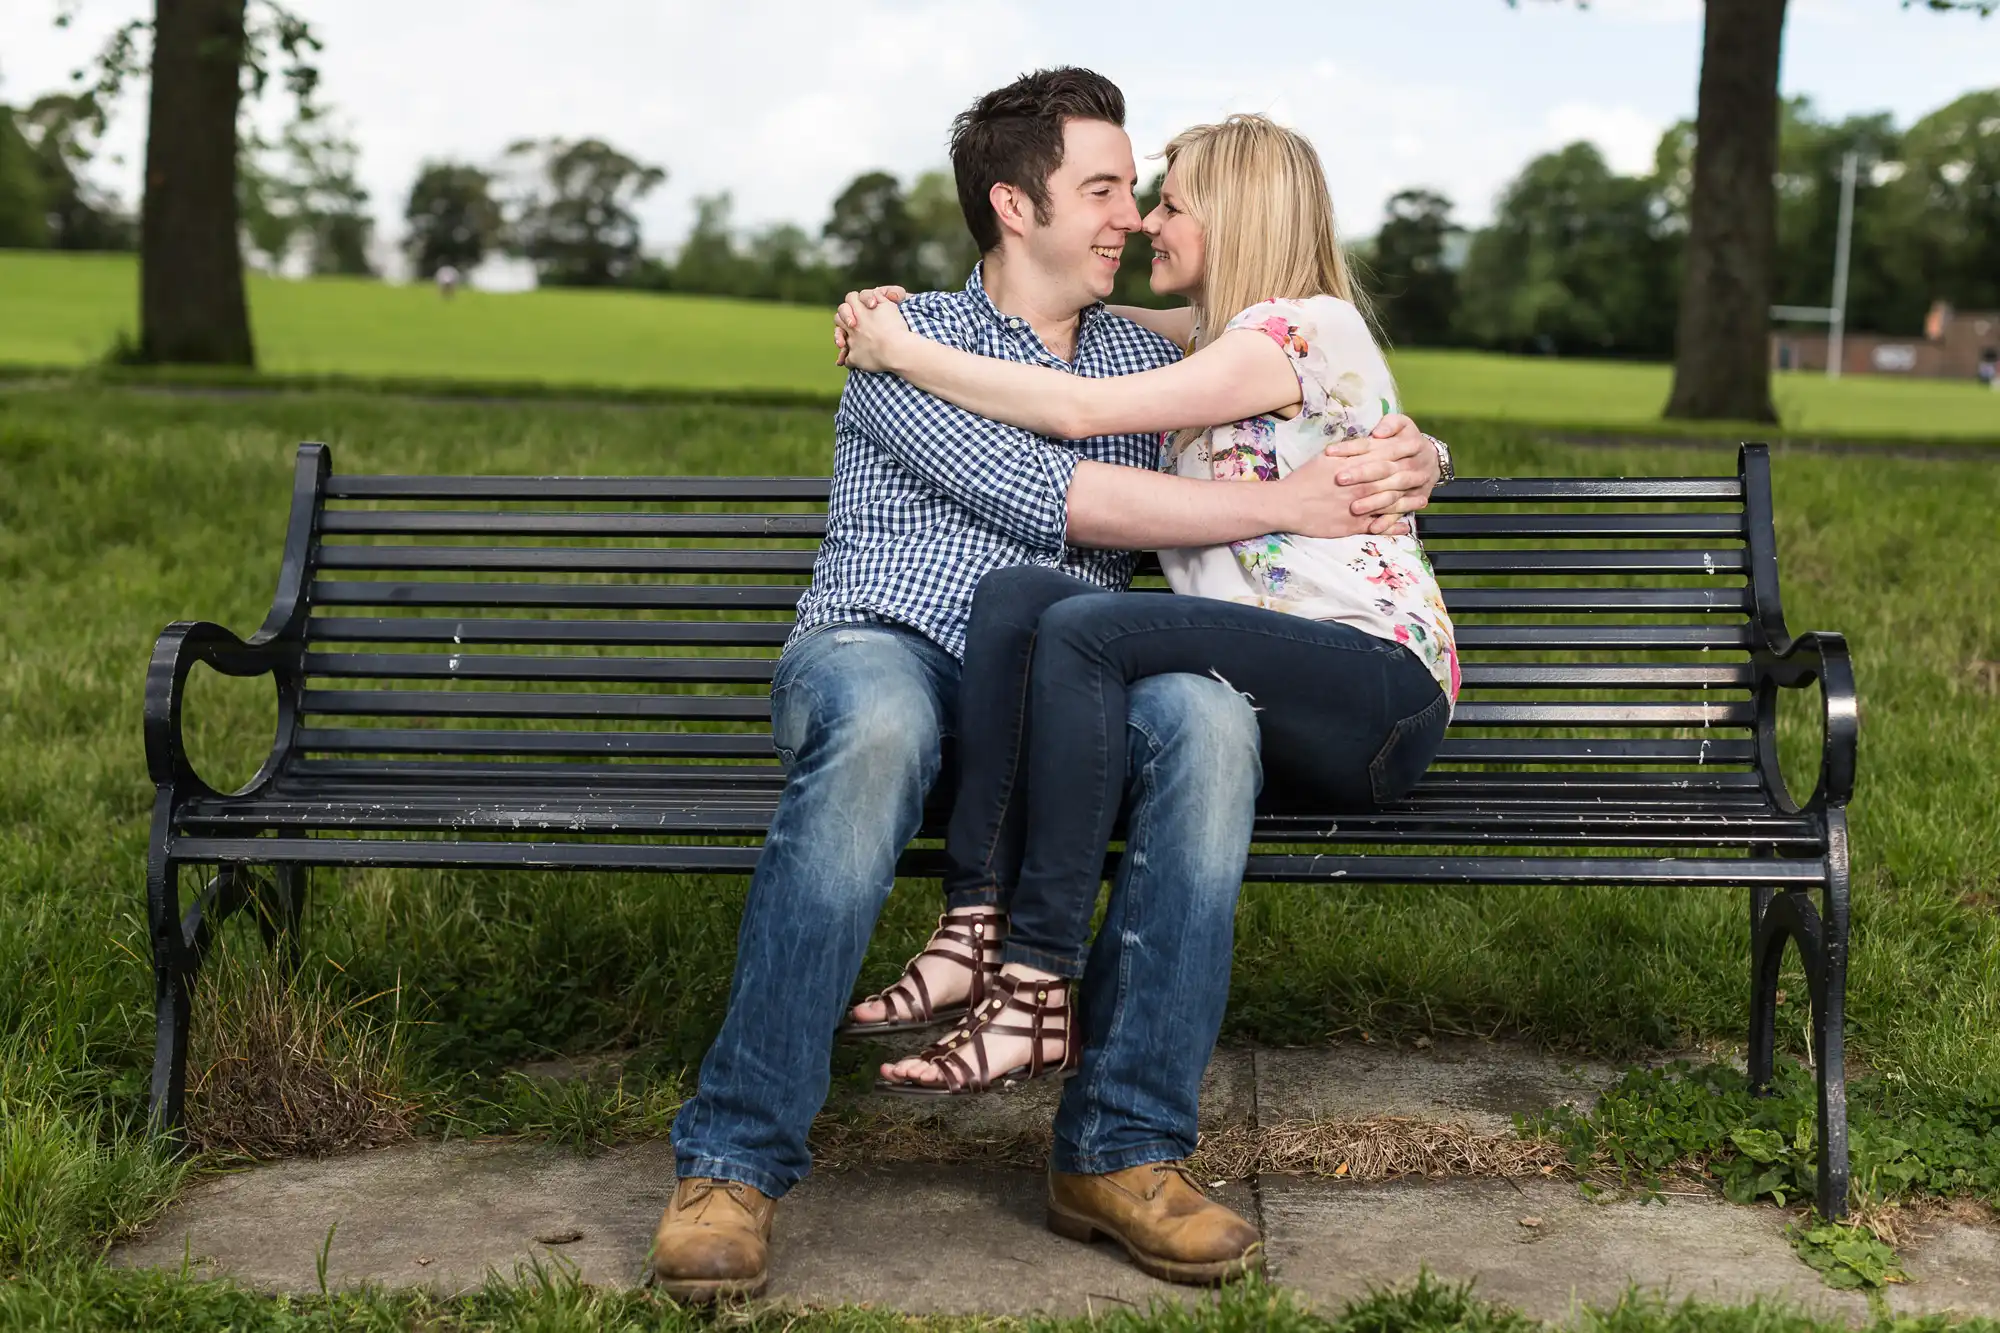 A young couple sitting closely on a park bench, embracing and smiling at each other, with trees and grass in the background.